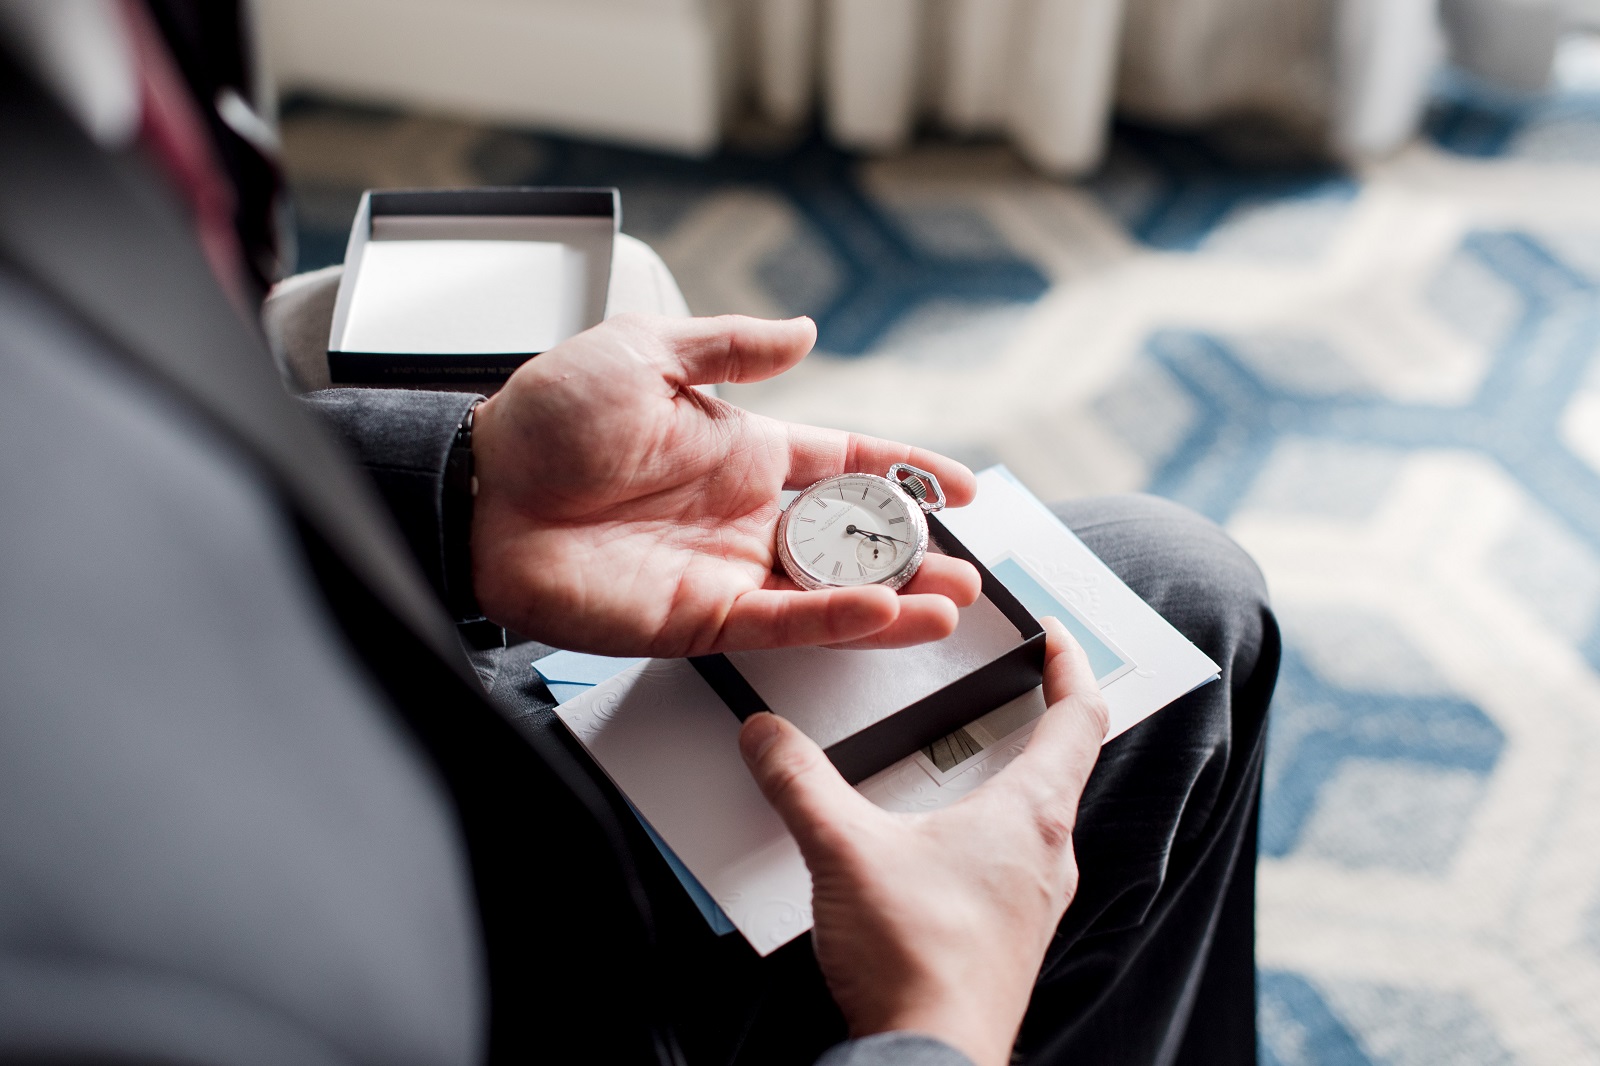 18 Cool Gadget Gifts Ideas for Groom On His Wedding